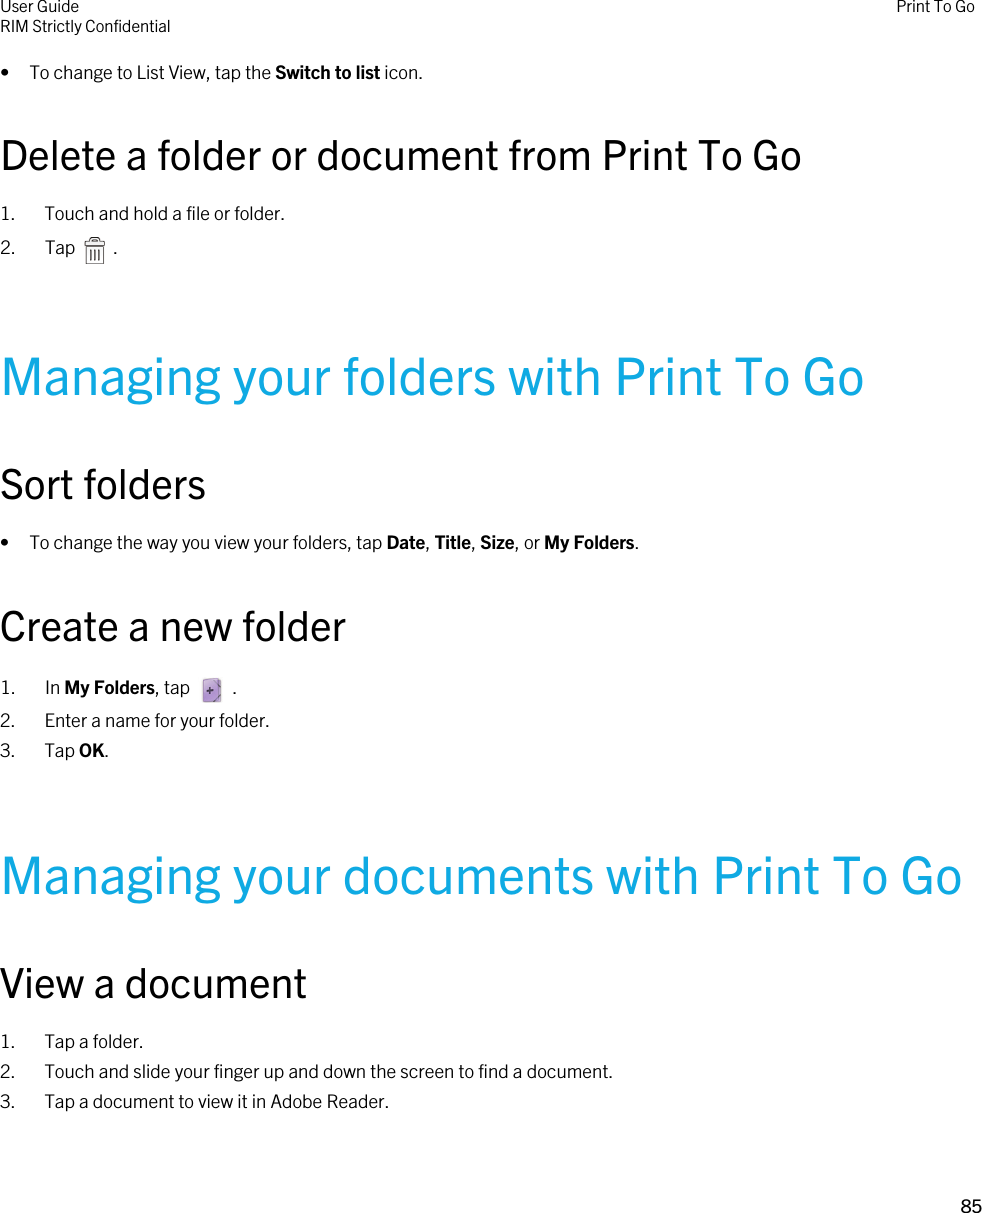 • To change to List View, tap the Switch to list icon.Delete a folder or document from Print To Go1. Touch and hold a file or folder.2.  Tap    .Managing your folders with Print To GoSort folders• To change the way you view your folders, tap Date, Title, Size, or My Folders.Create a new folder1.  In My Folders, tap    .2. Enter a name for your folder.3. Tap OK.Managing your documents with Print To GoView a document1. Tap a folder.2. Touch and slide your finger up and down the screen to find a document.3. Tap a document to view it in Adobe Reader.User GuideRIM Strictly Confidential Print To Go85 